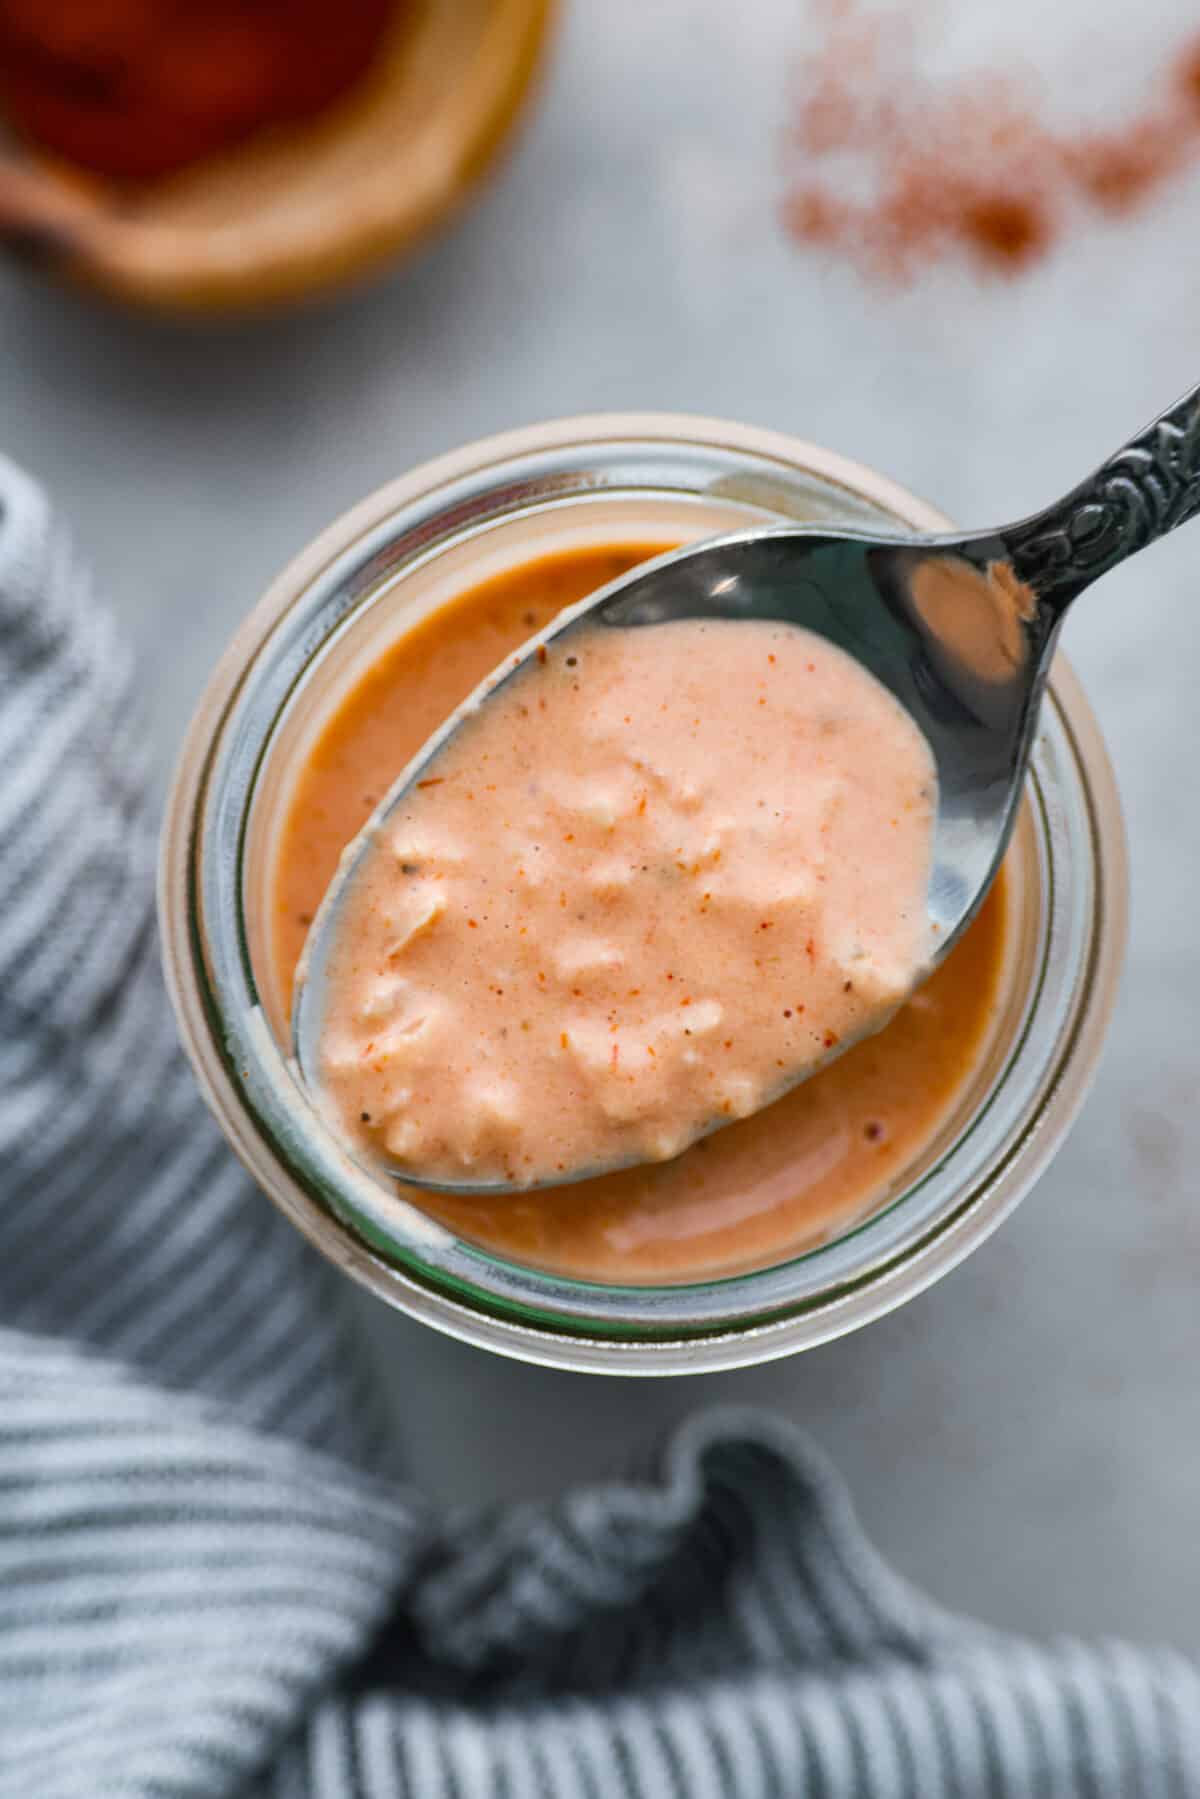 Top-down view of a jar of Russian dressing.